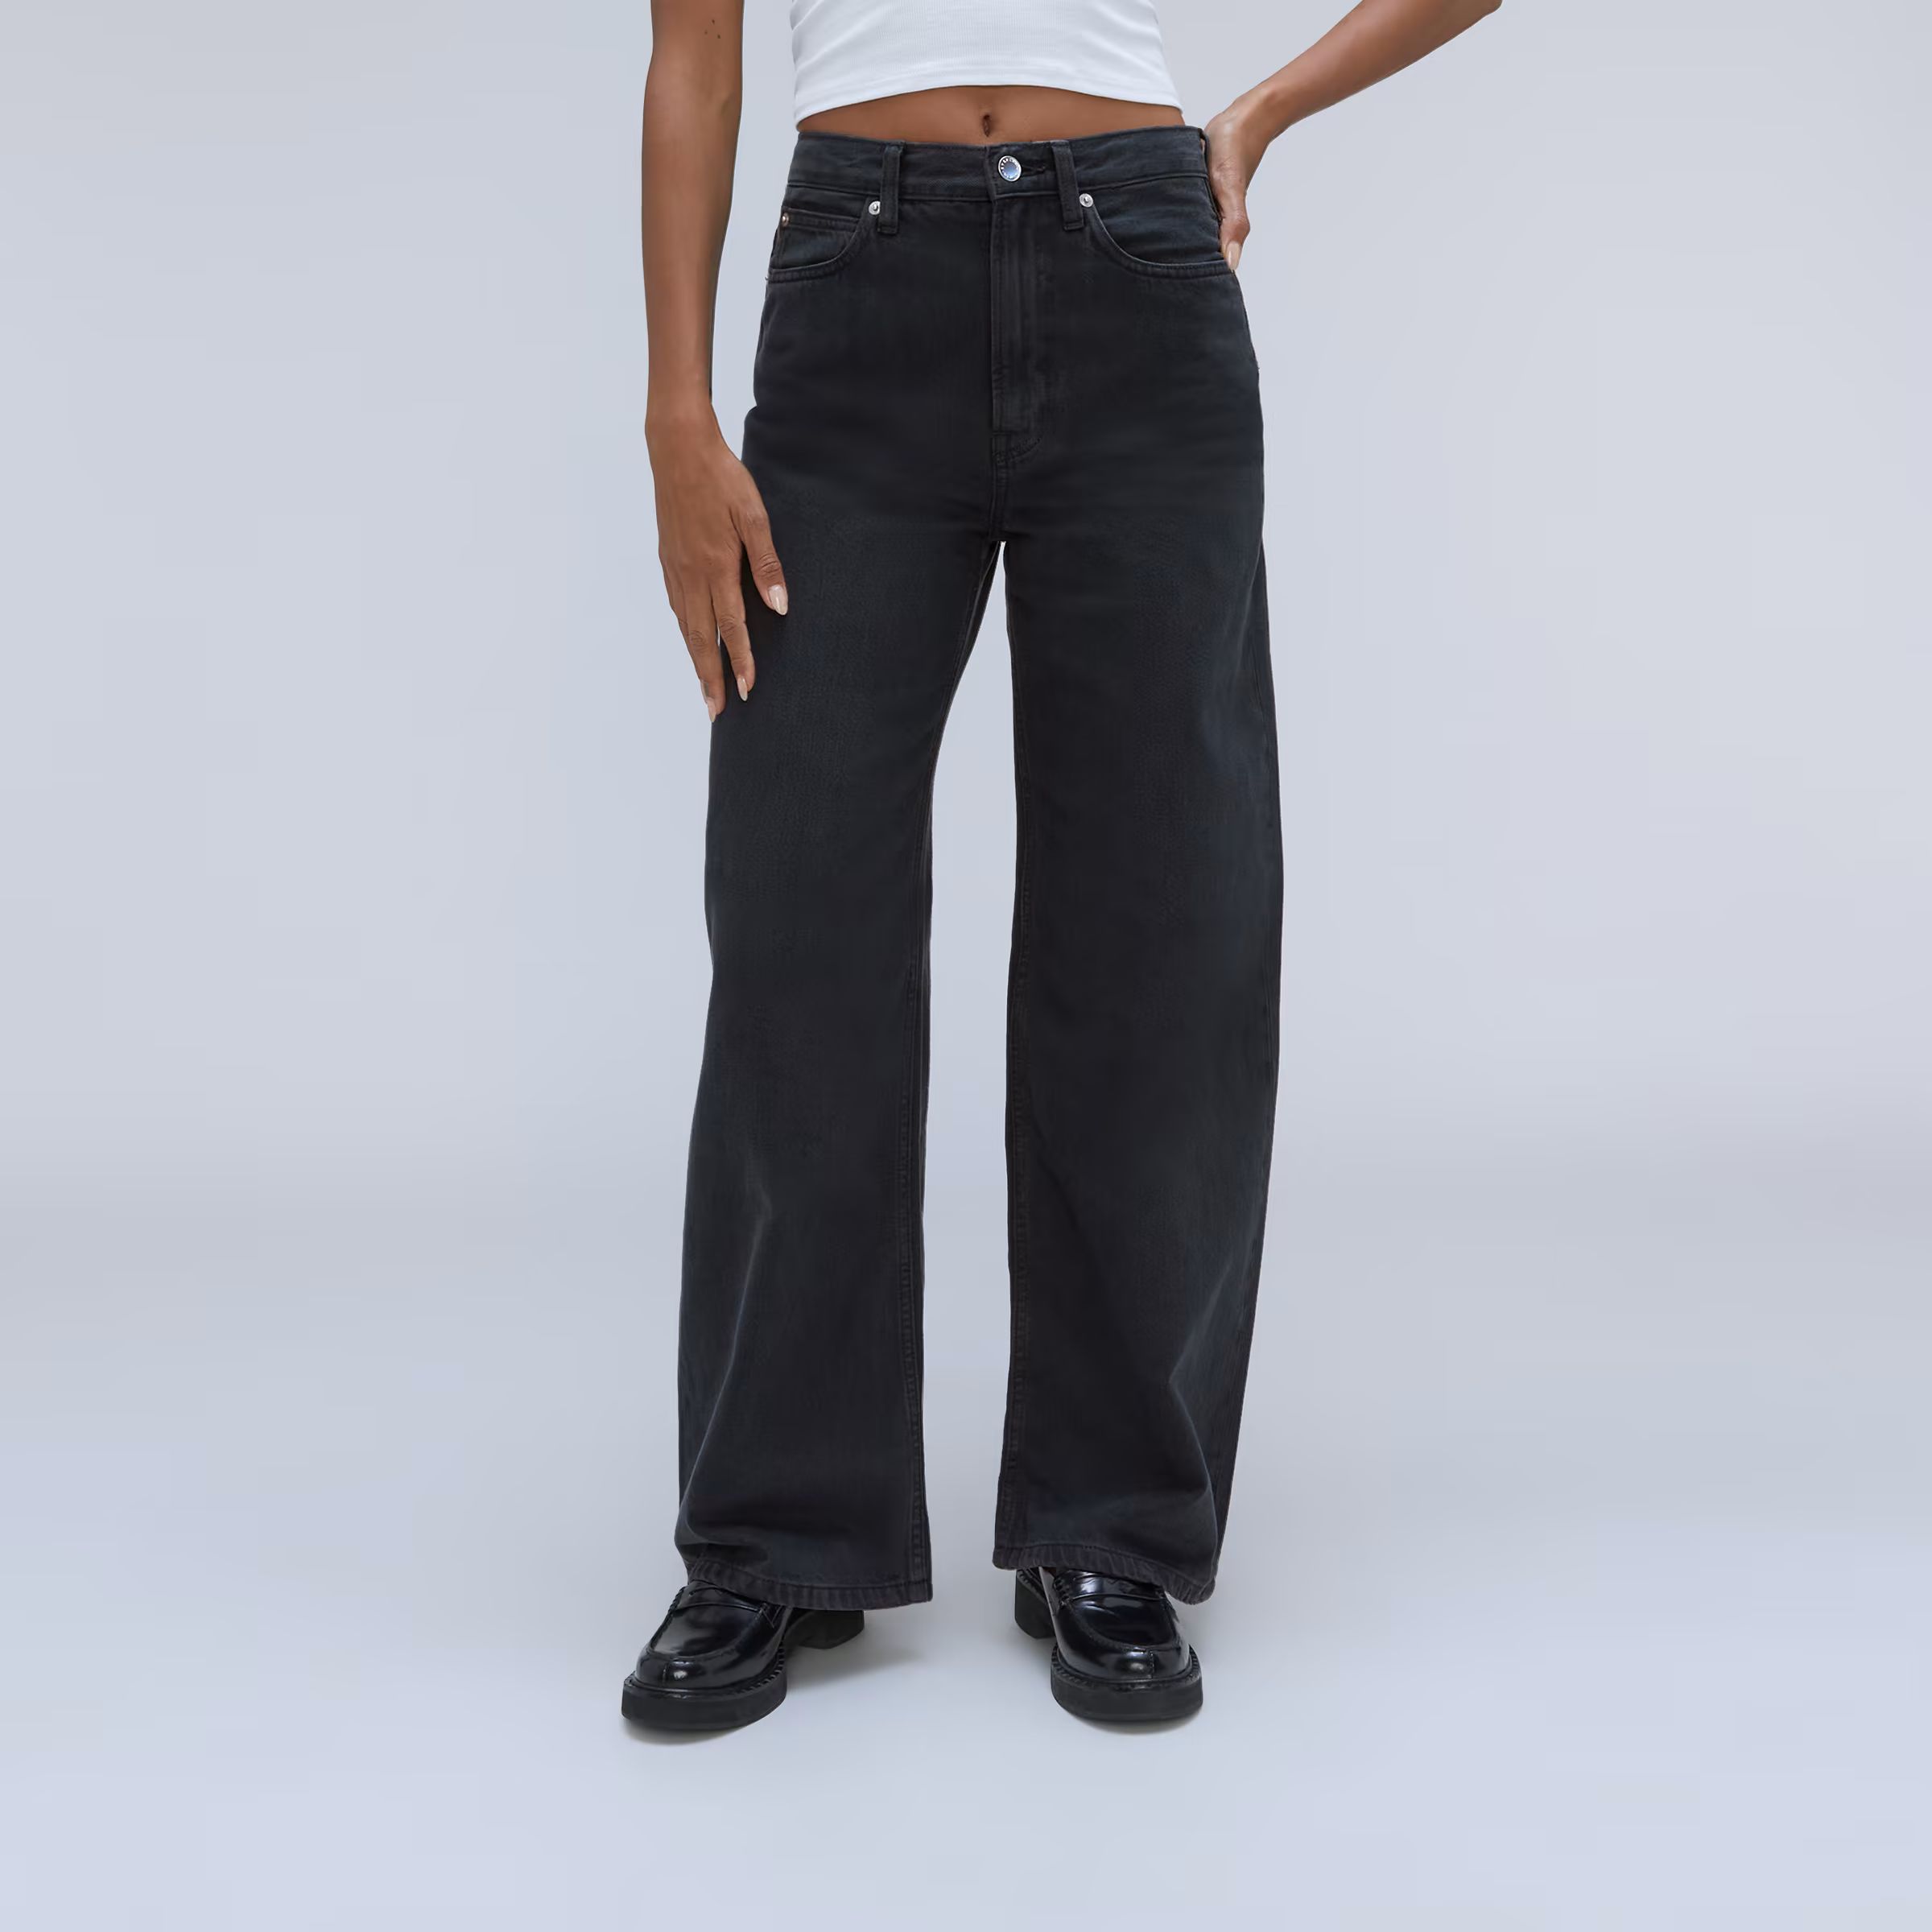 The Baggy Jean | Everlane